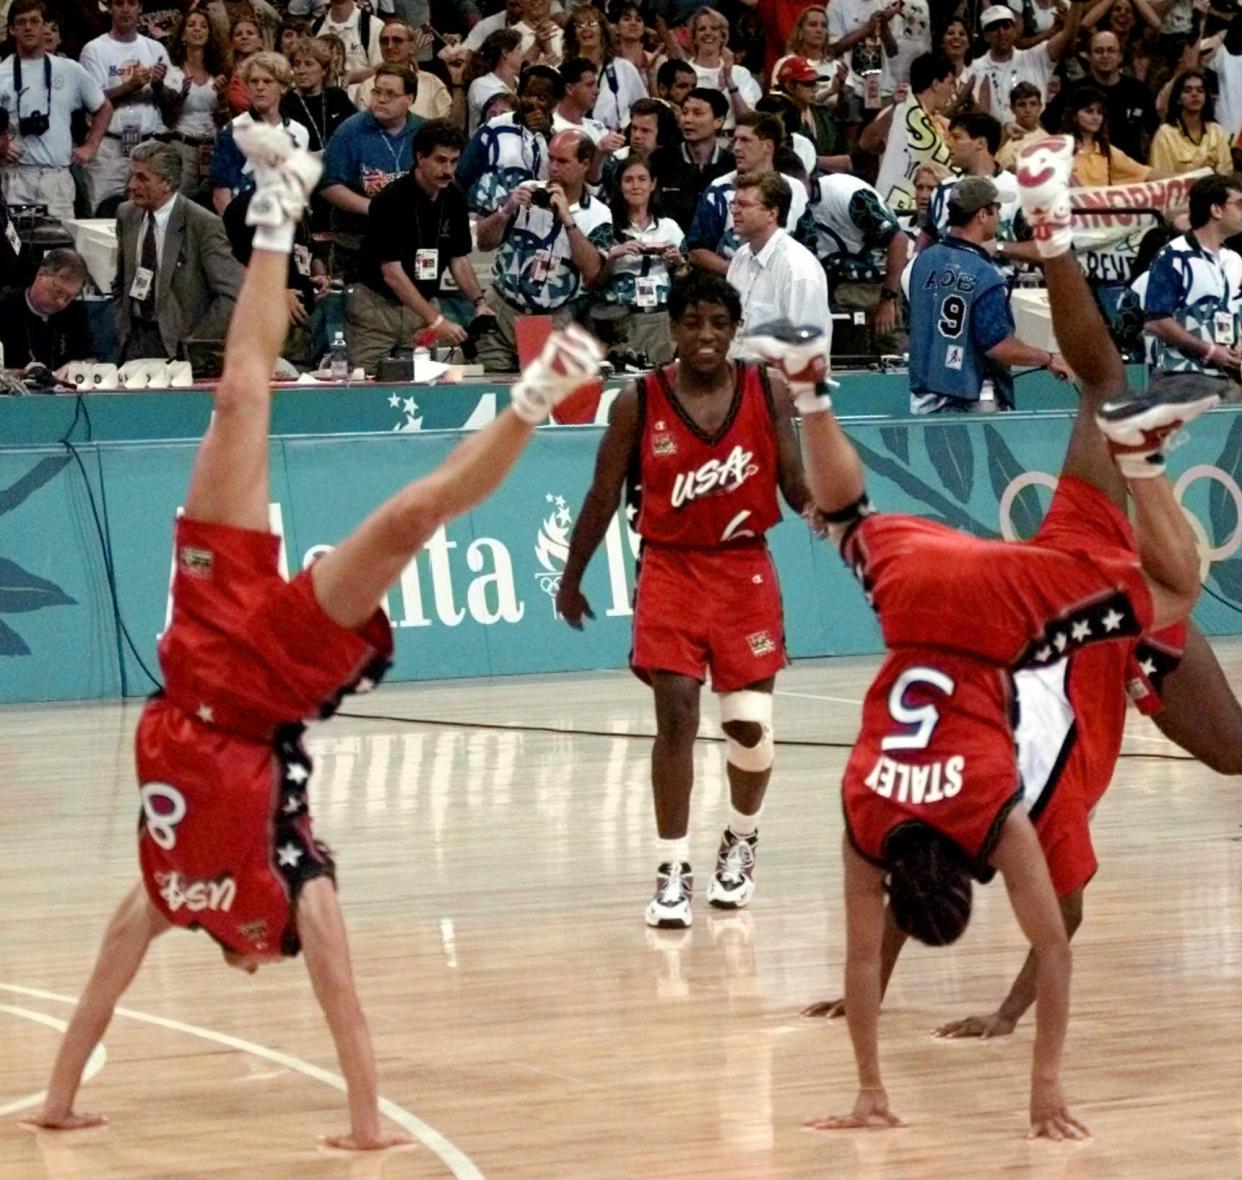 FILE - In this Aug. 4, 1996, file photo, United States team members Jennifer Azzi (8) and Dawn Staley (5) do cartwheels as Ruthie Bolton (6) watches, after the team's victory over Brazil for the gold medal in women's basketball at the Centennial Summer Olympic Games in Atlanta. (AP Photo/John Gaps III, File)